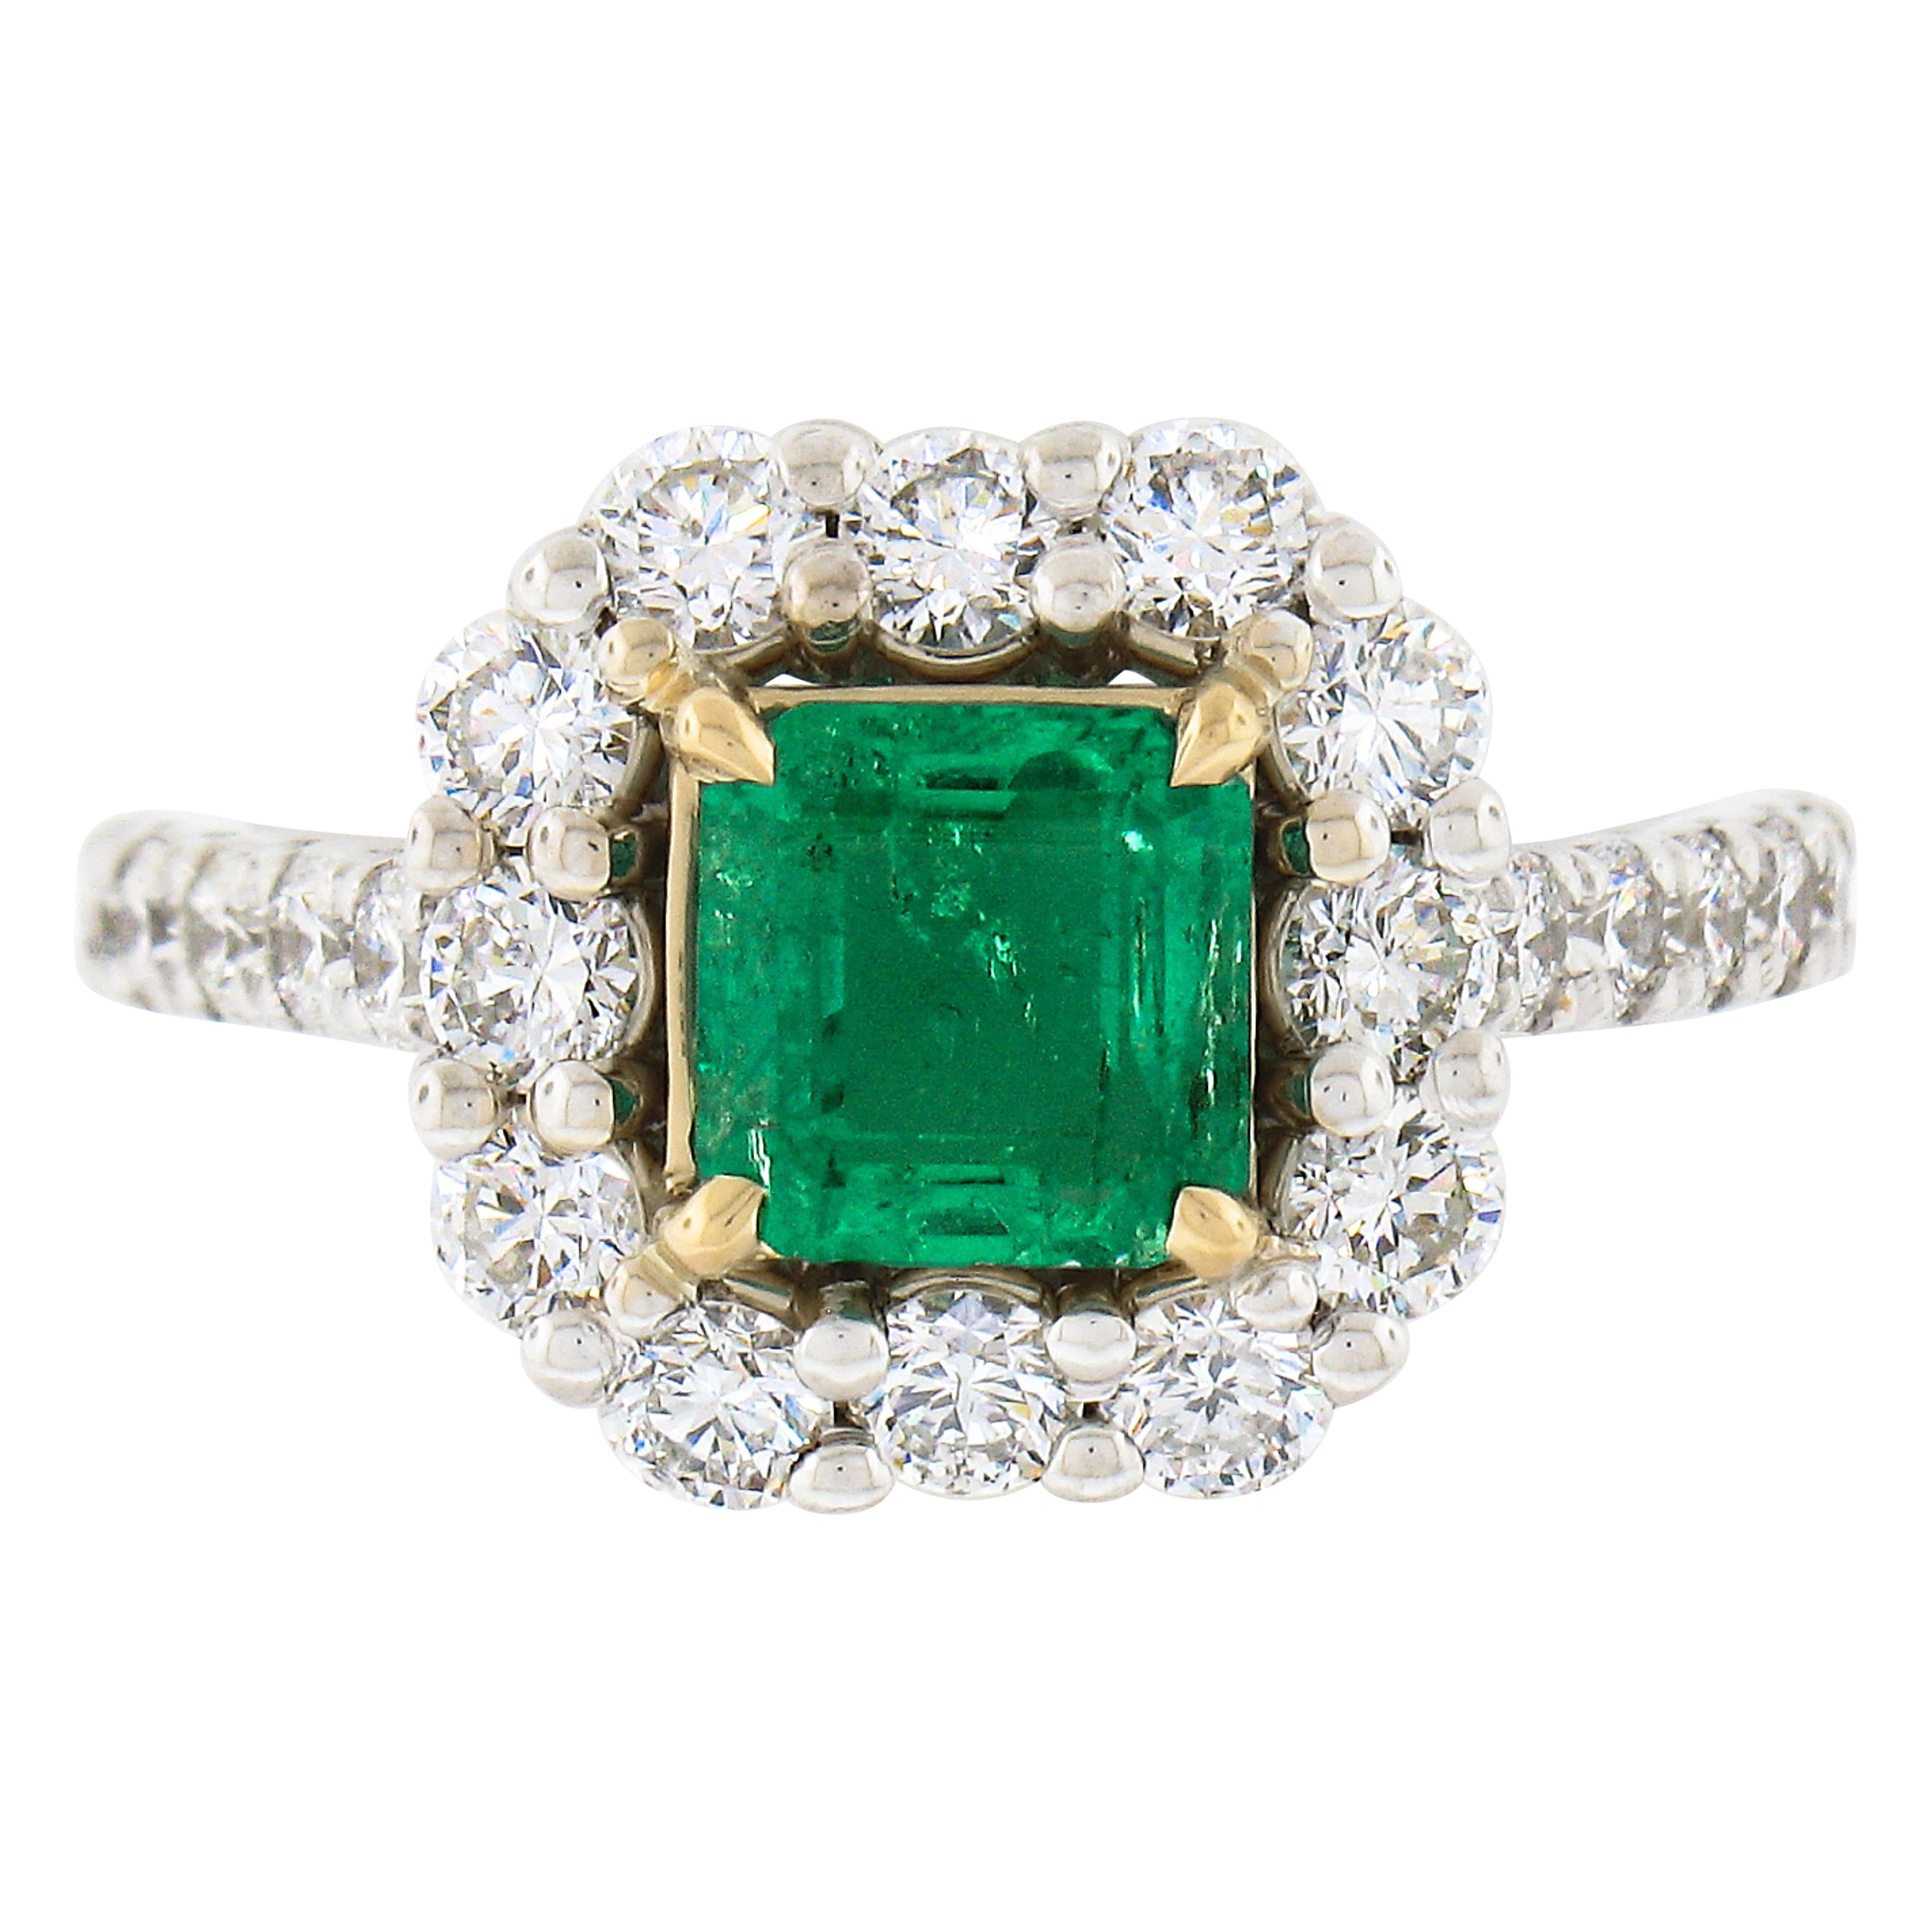 New 18k TT Gold 2.51ctw GIA Colombia Green Emerald w/ Diamond Halo Cocktail Ring For Sale